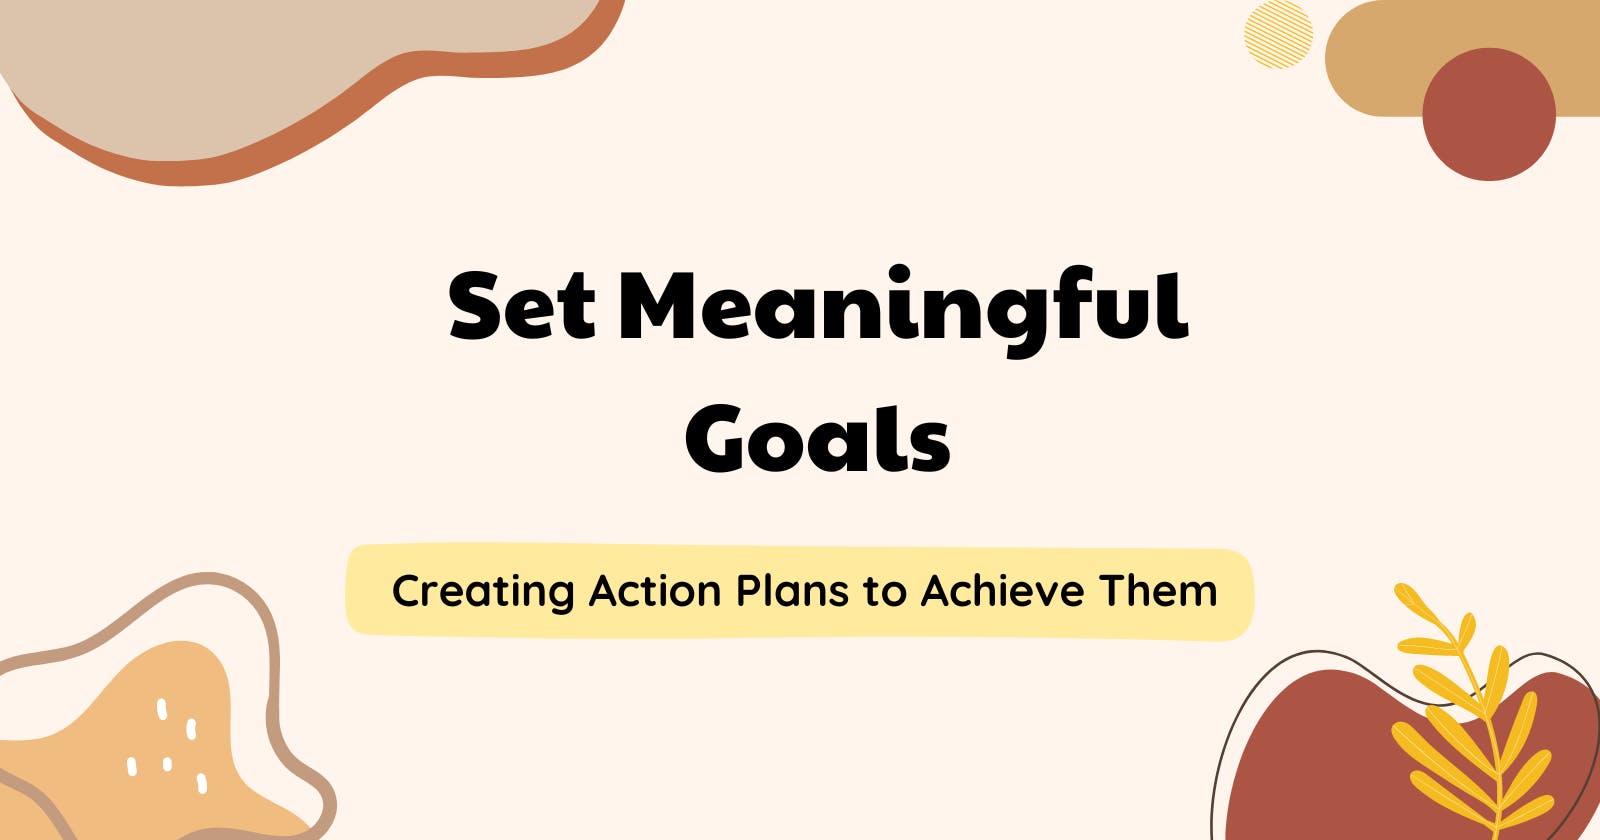 Techniques for Setting Meaningful Goals and Creating Action Plans to Achieve Them 🎯